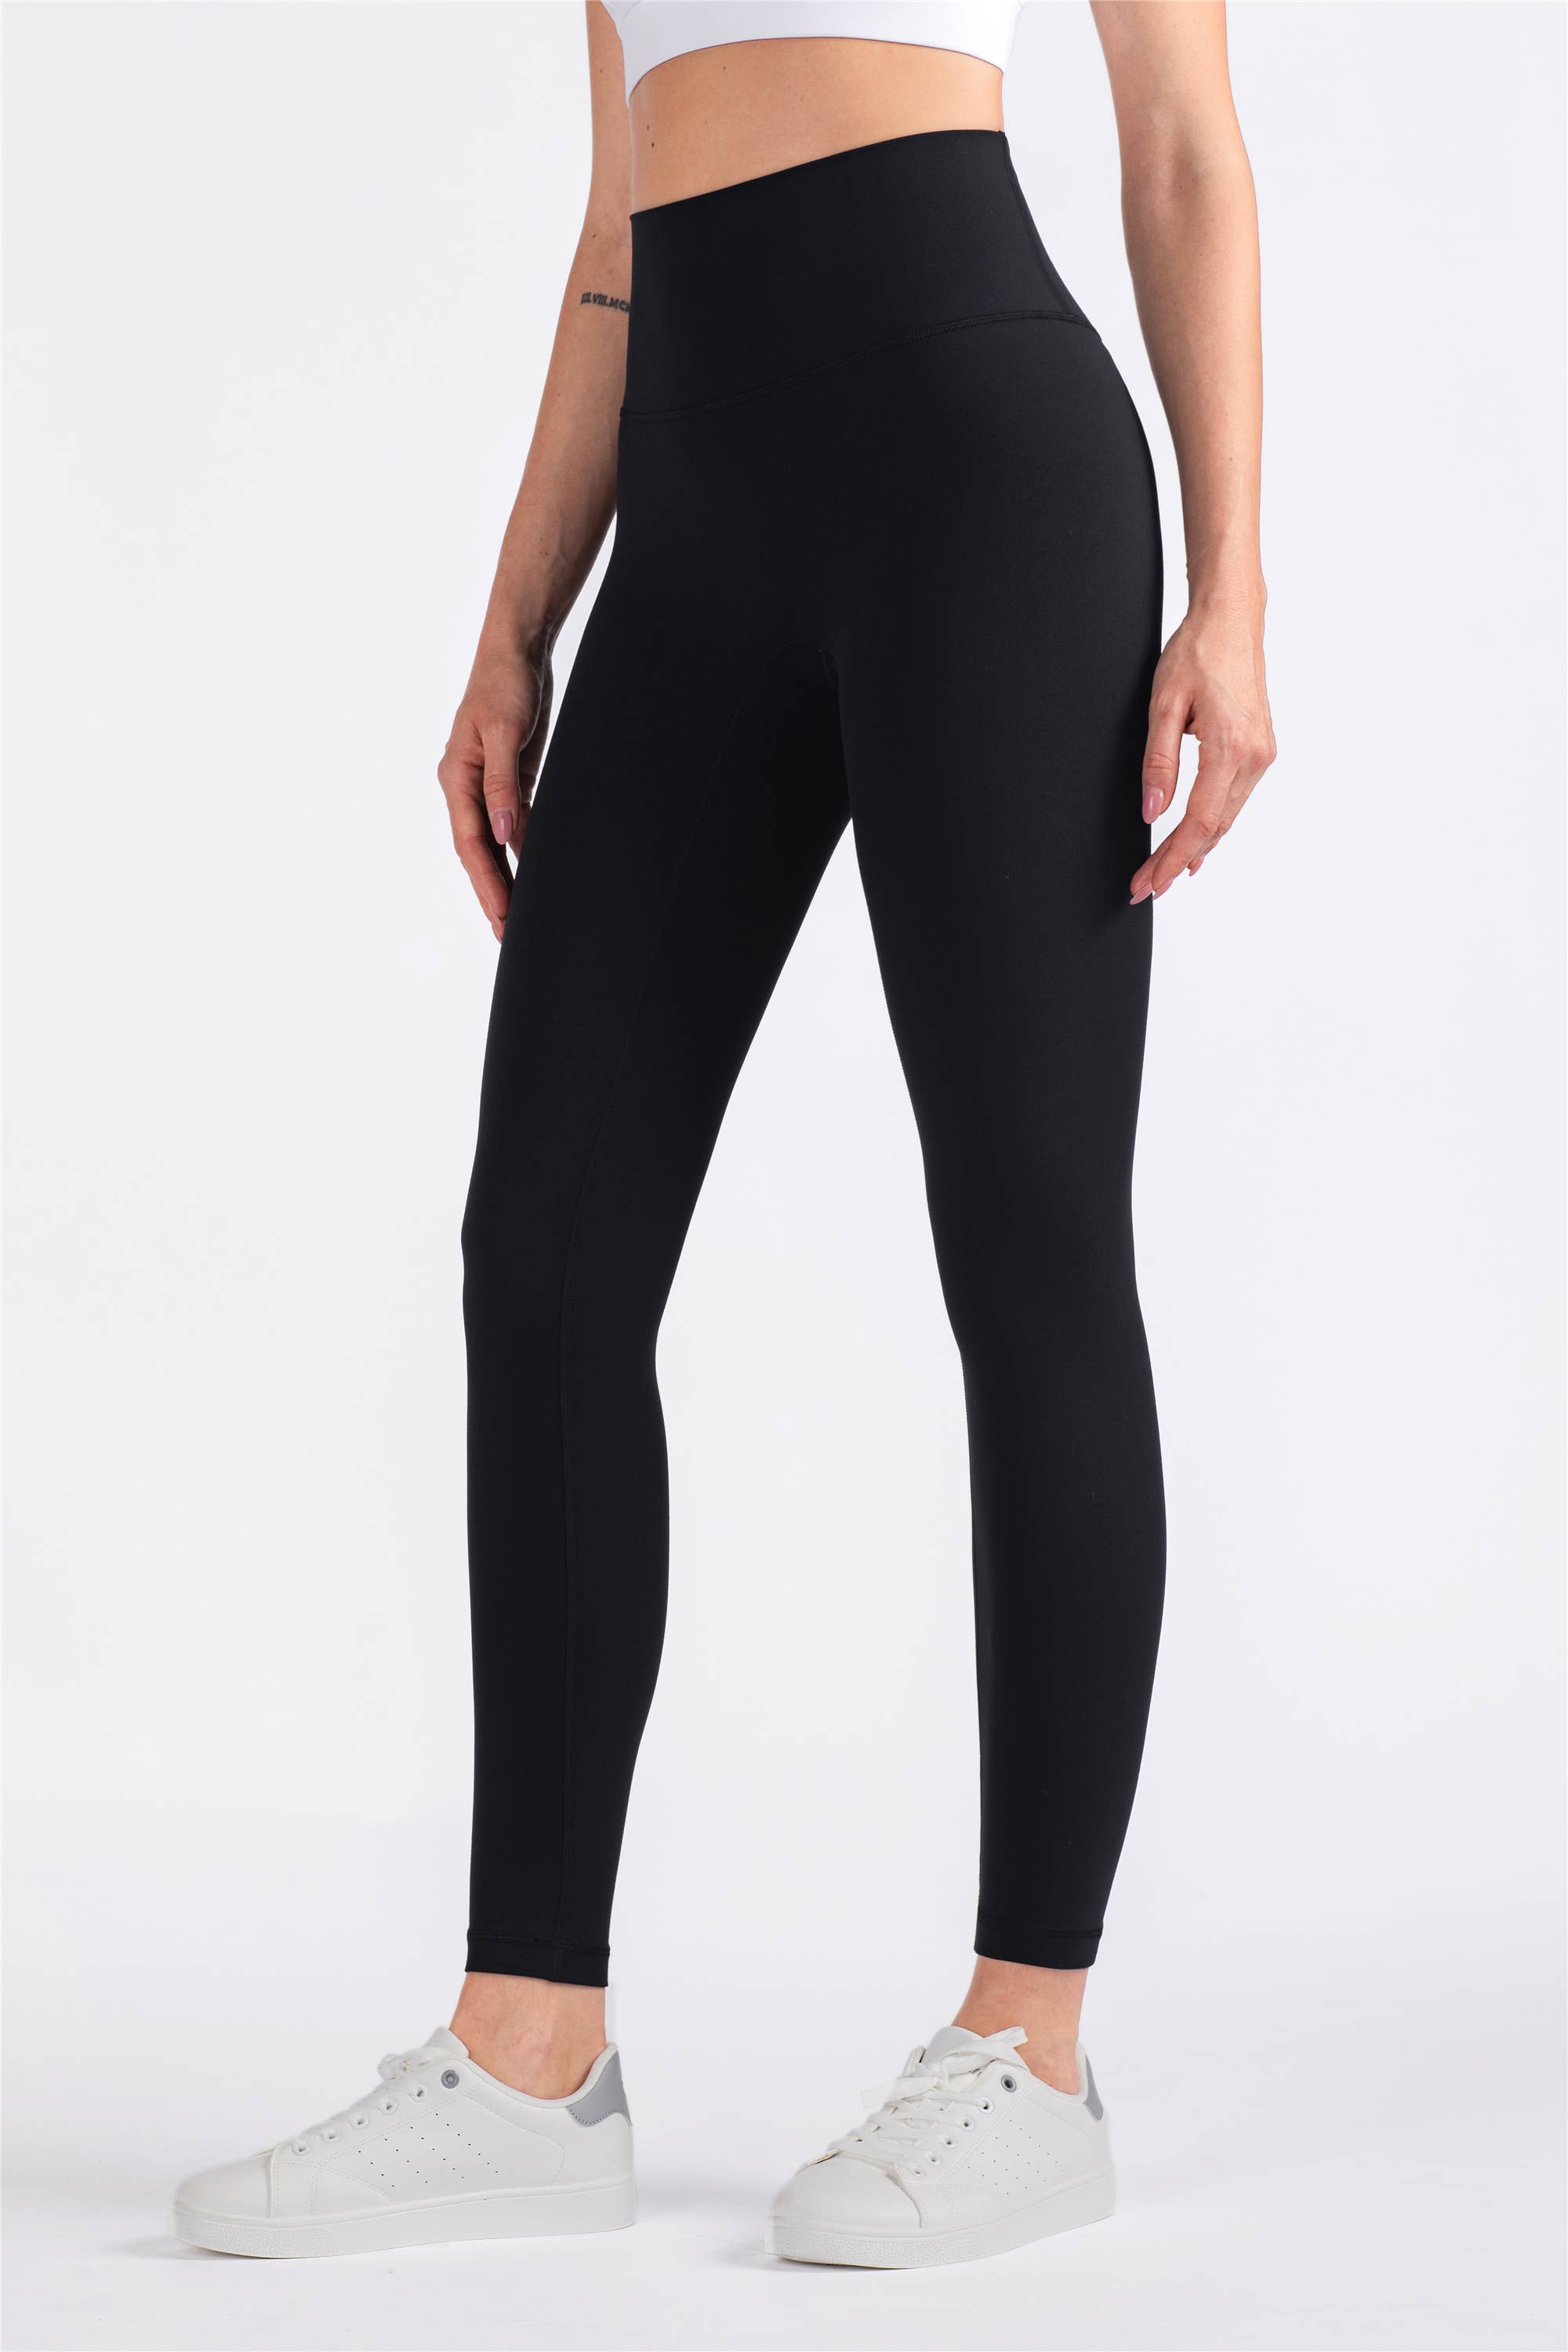 Empower Seamless High Waist Leggings in Black – Mallory Ruth Company